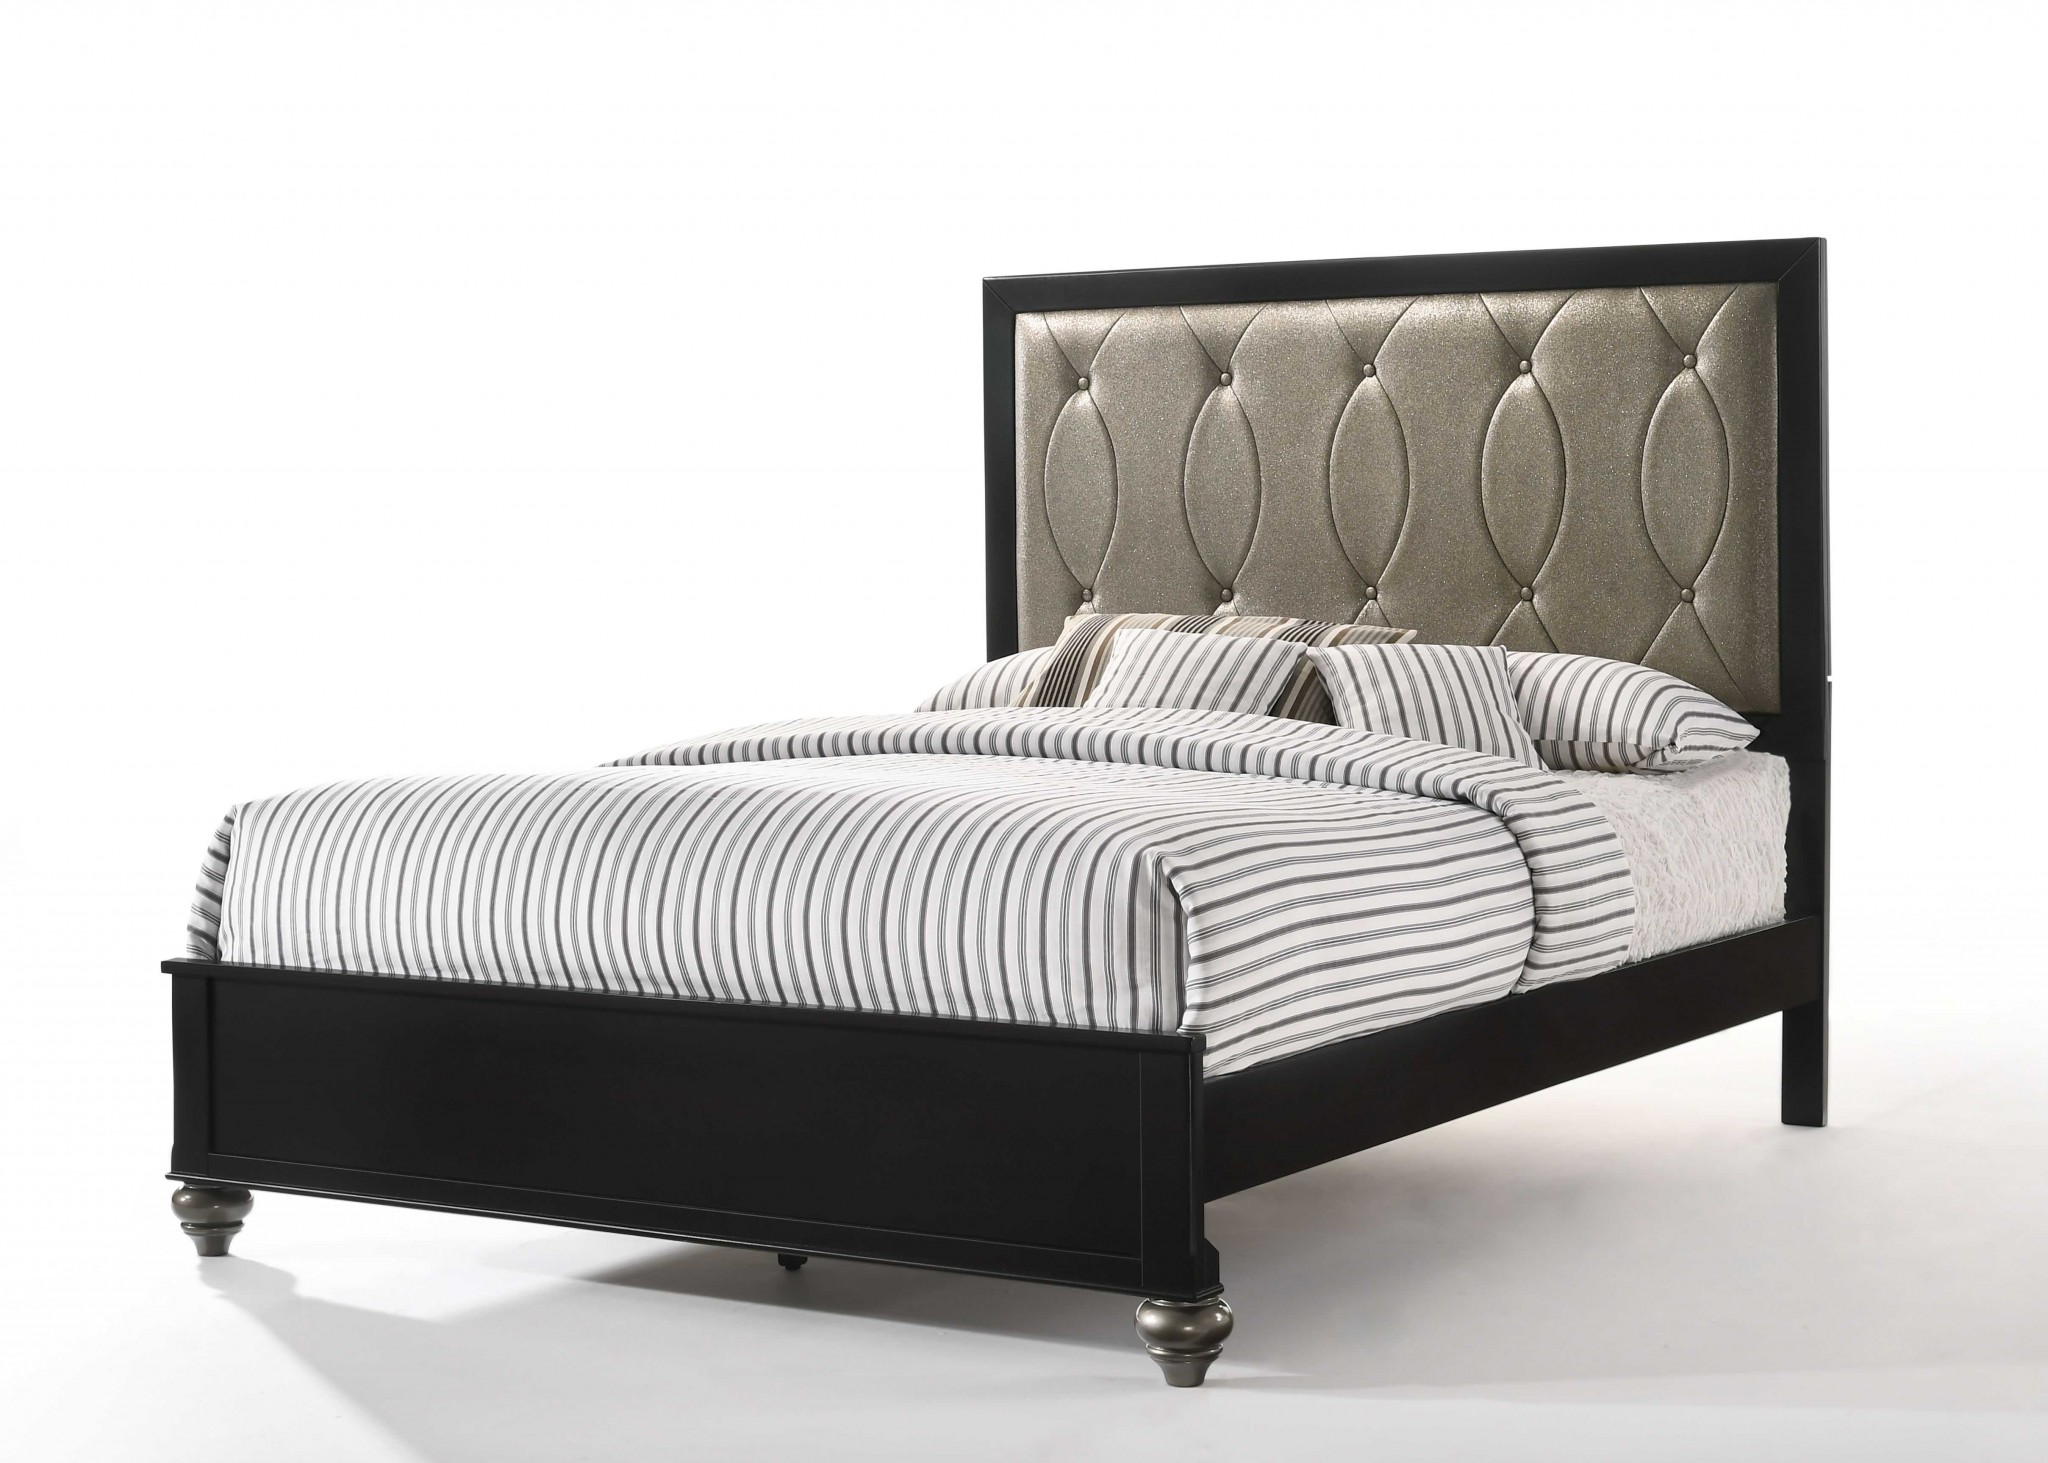 89" X 64" X 58" Copper Leatherette And Black Pu Queen Bed